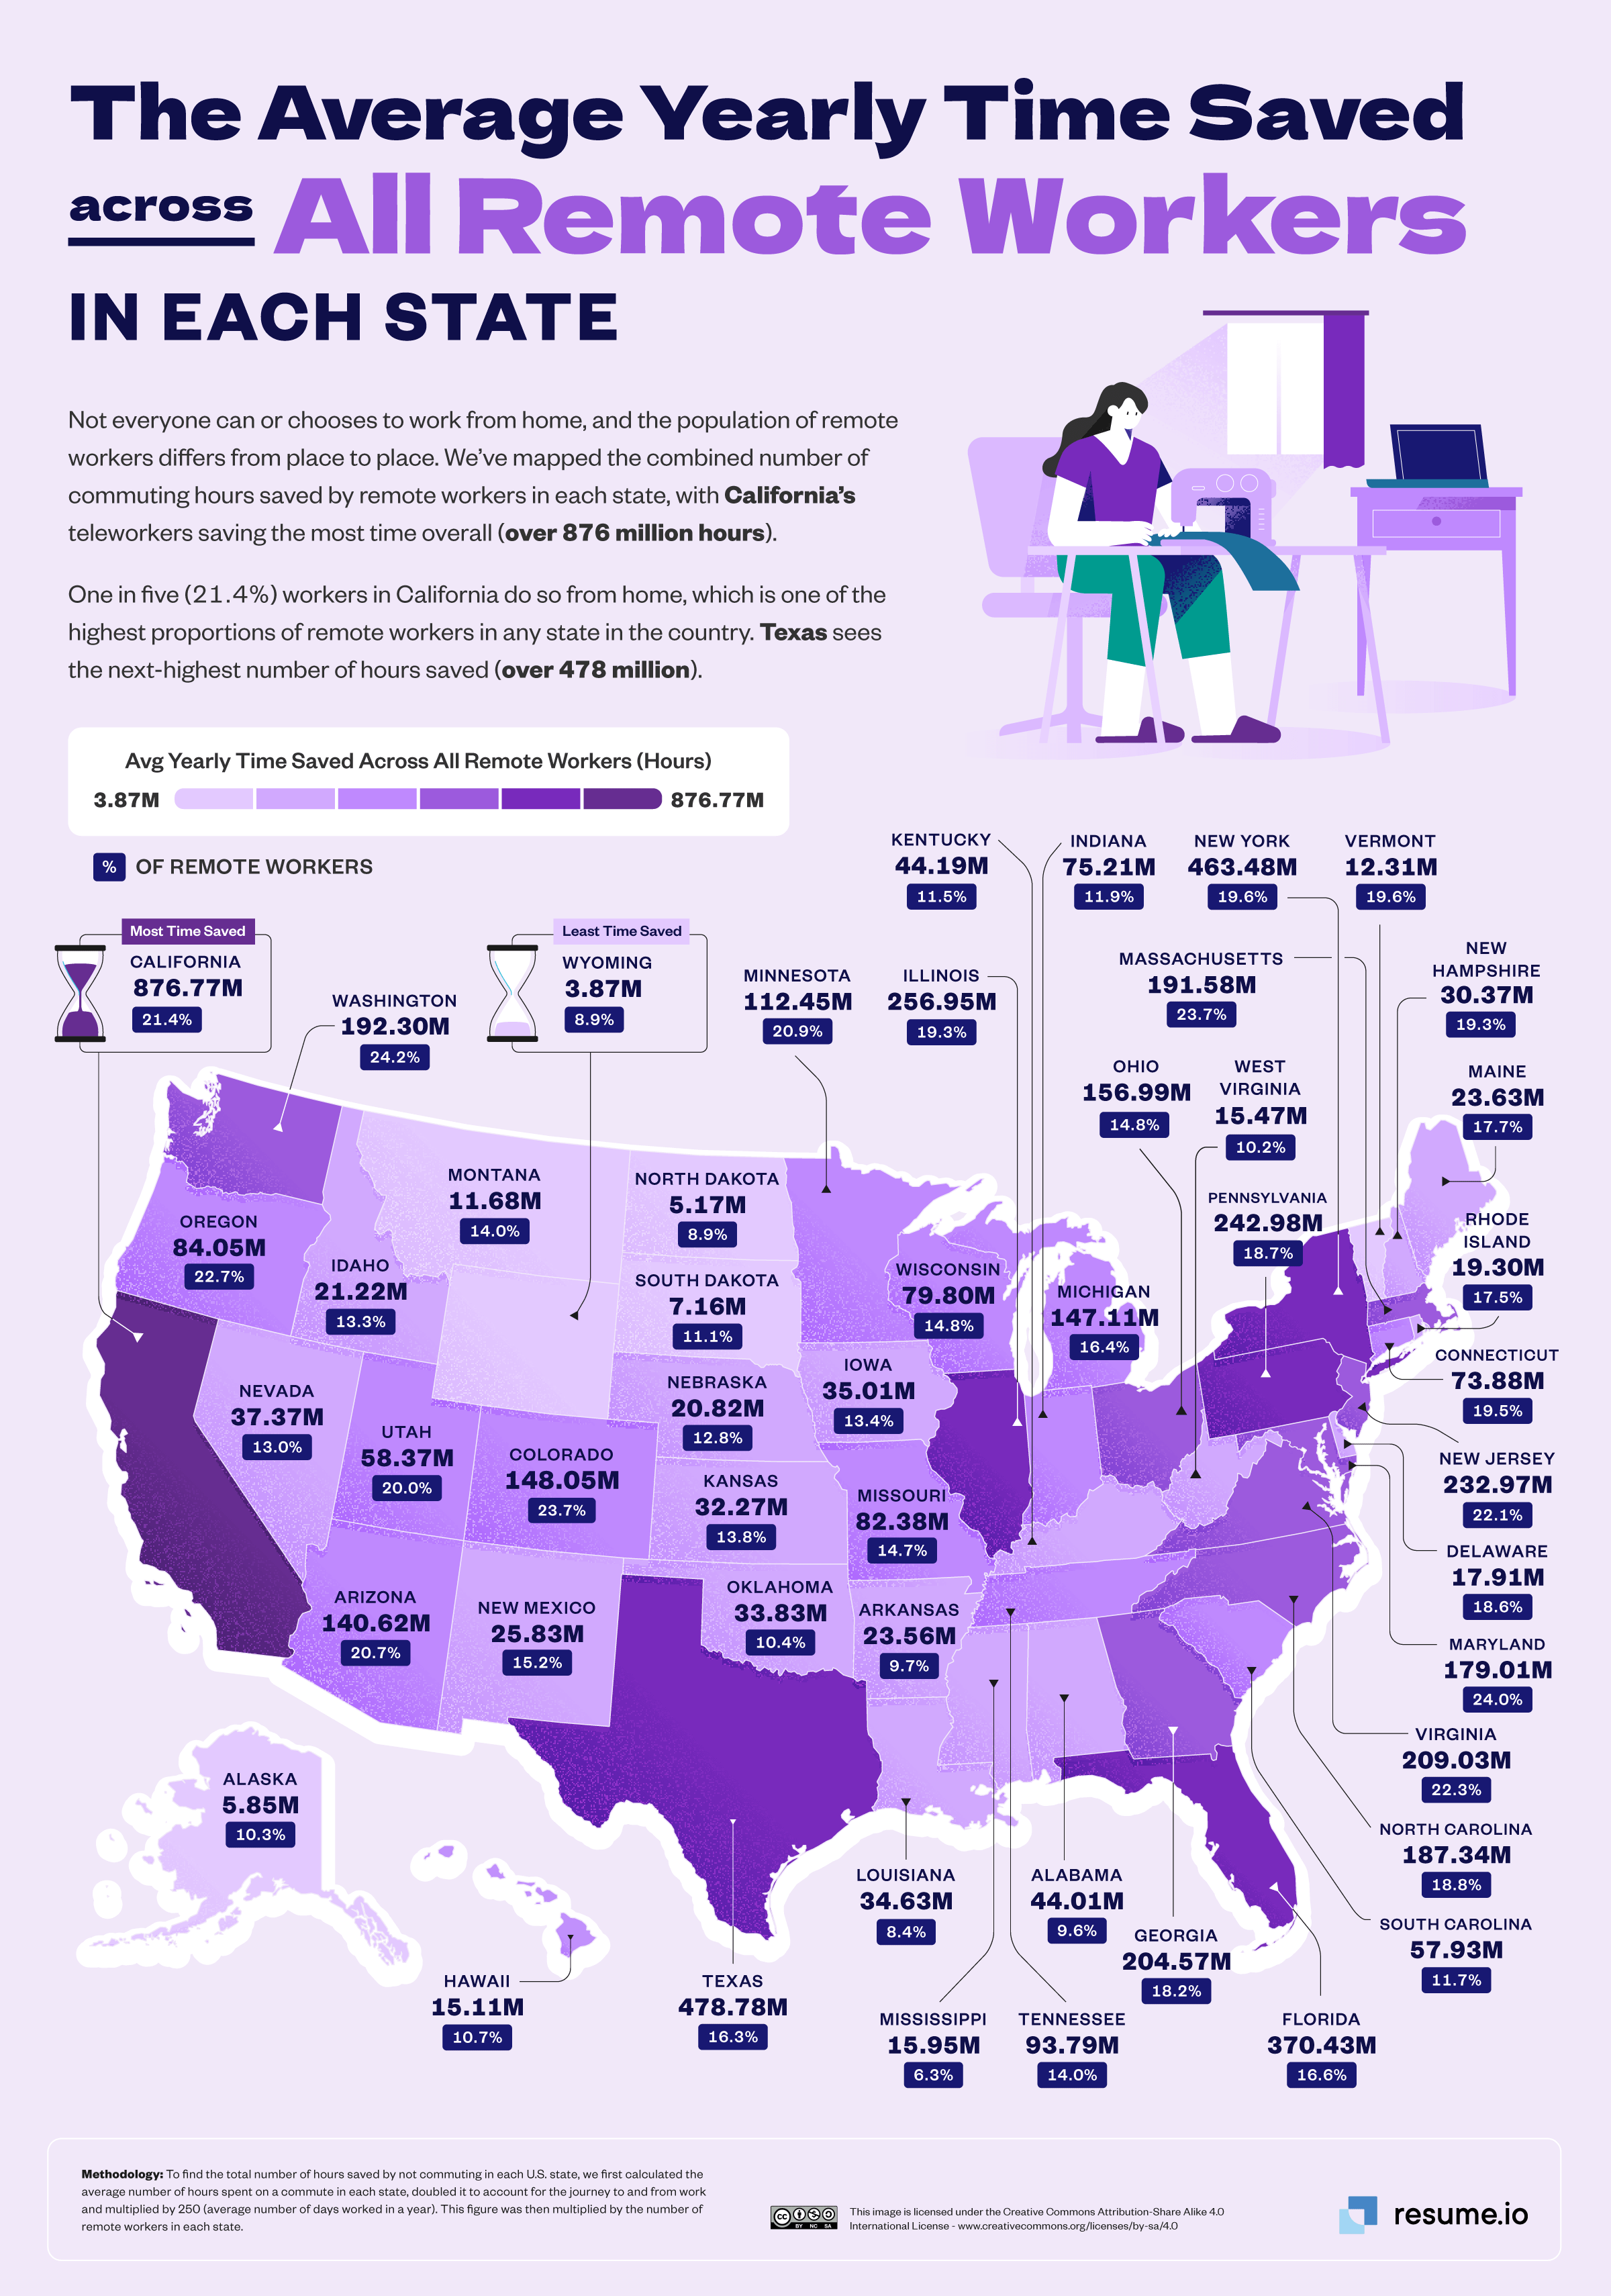 Yearly Time Saved Across All Remote Workers in Each State